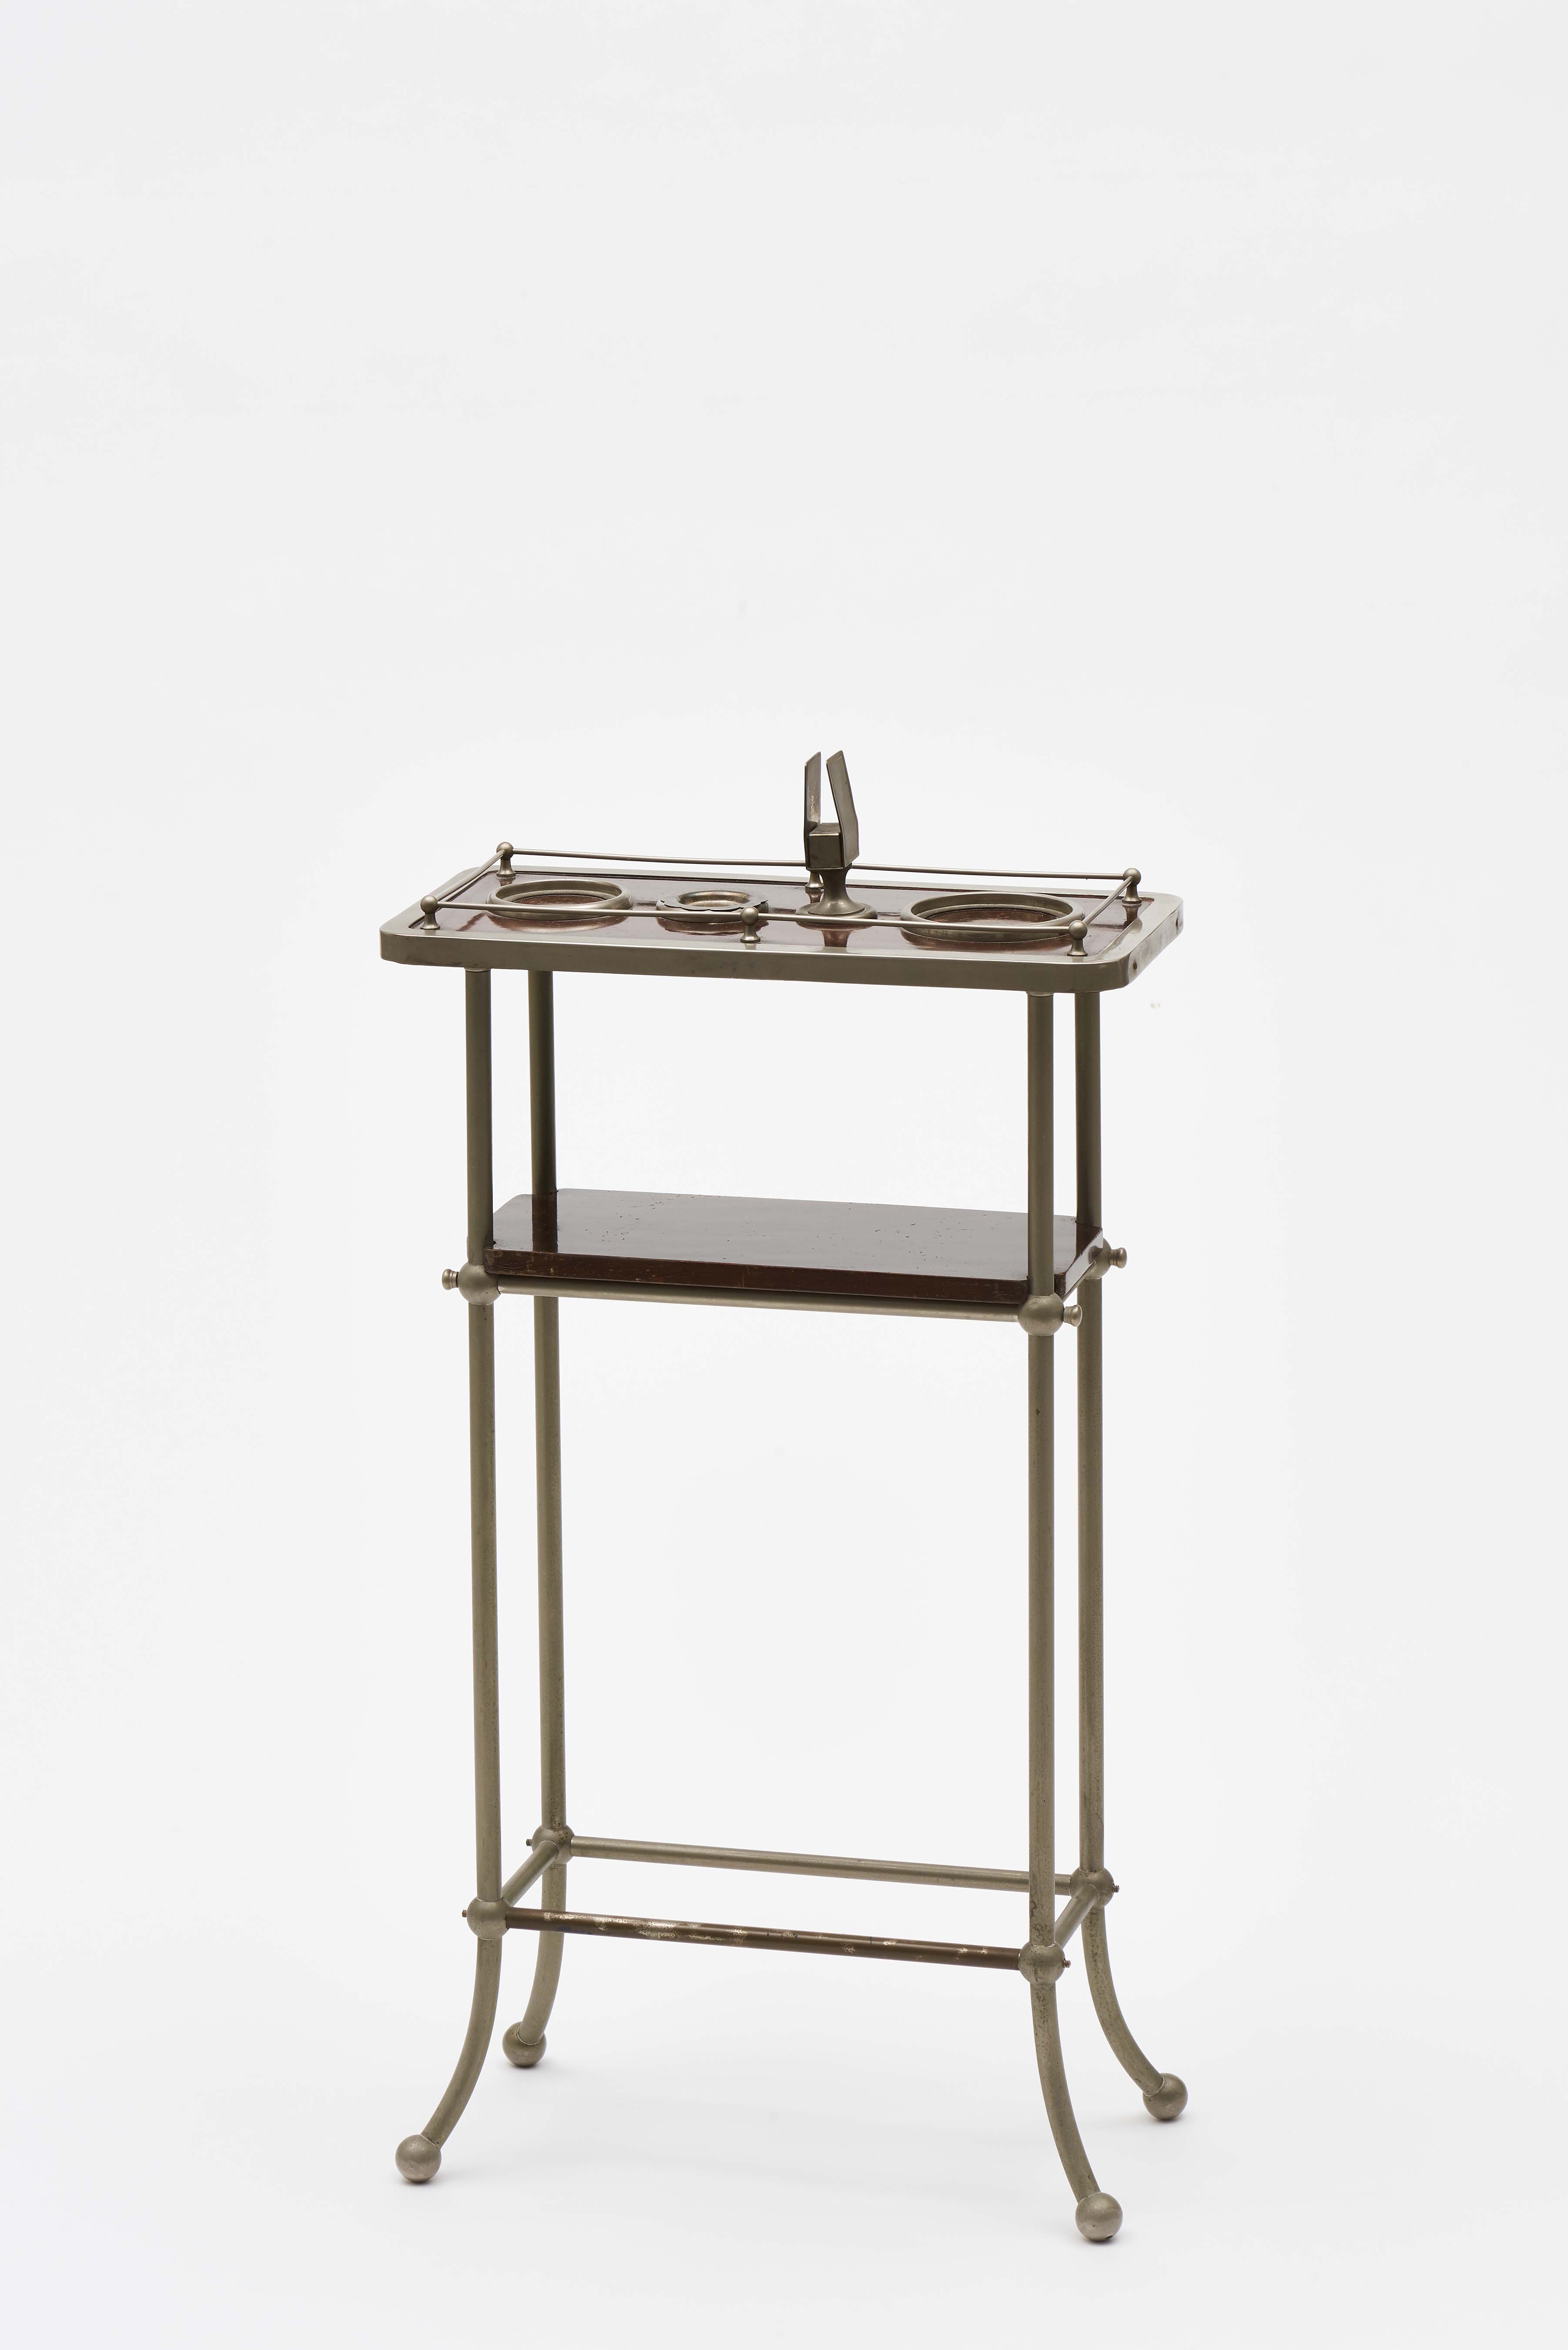 <BODY><div>Otto Wagner (attributed), Smoking table, ca. 1900</div><div>© MAK/Georg Mayer</div></BODY>